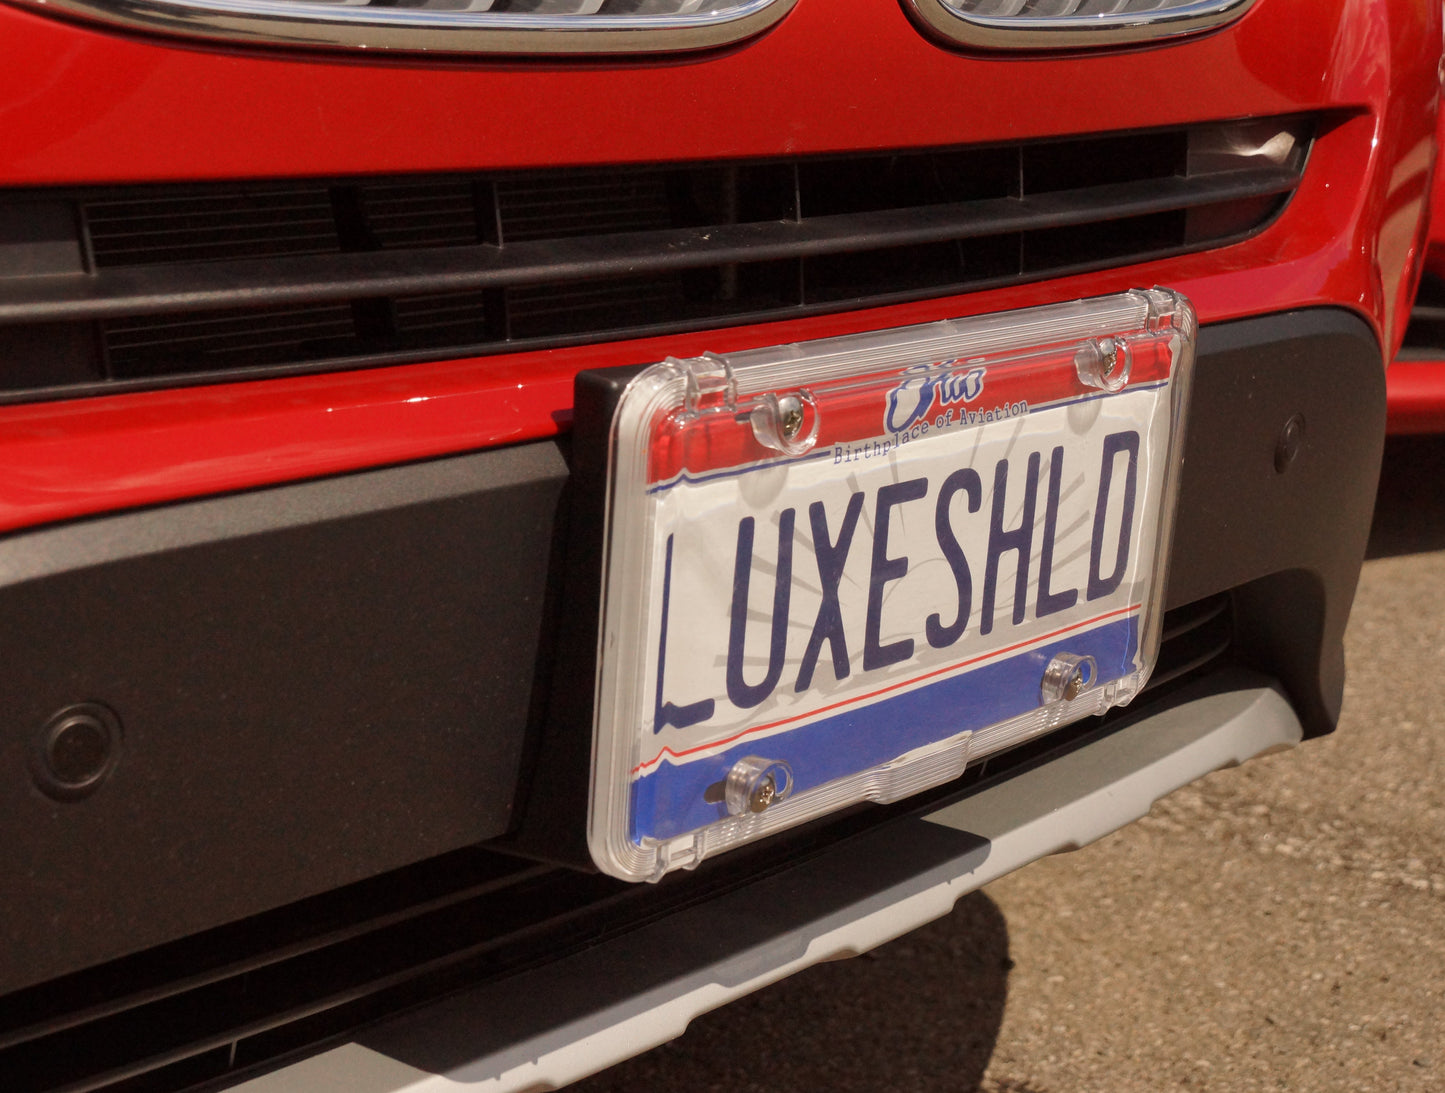 Luxe Shield, Premium Clear License Plate Cover includes Stainless Screws